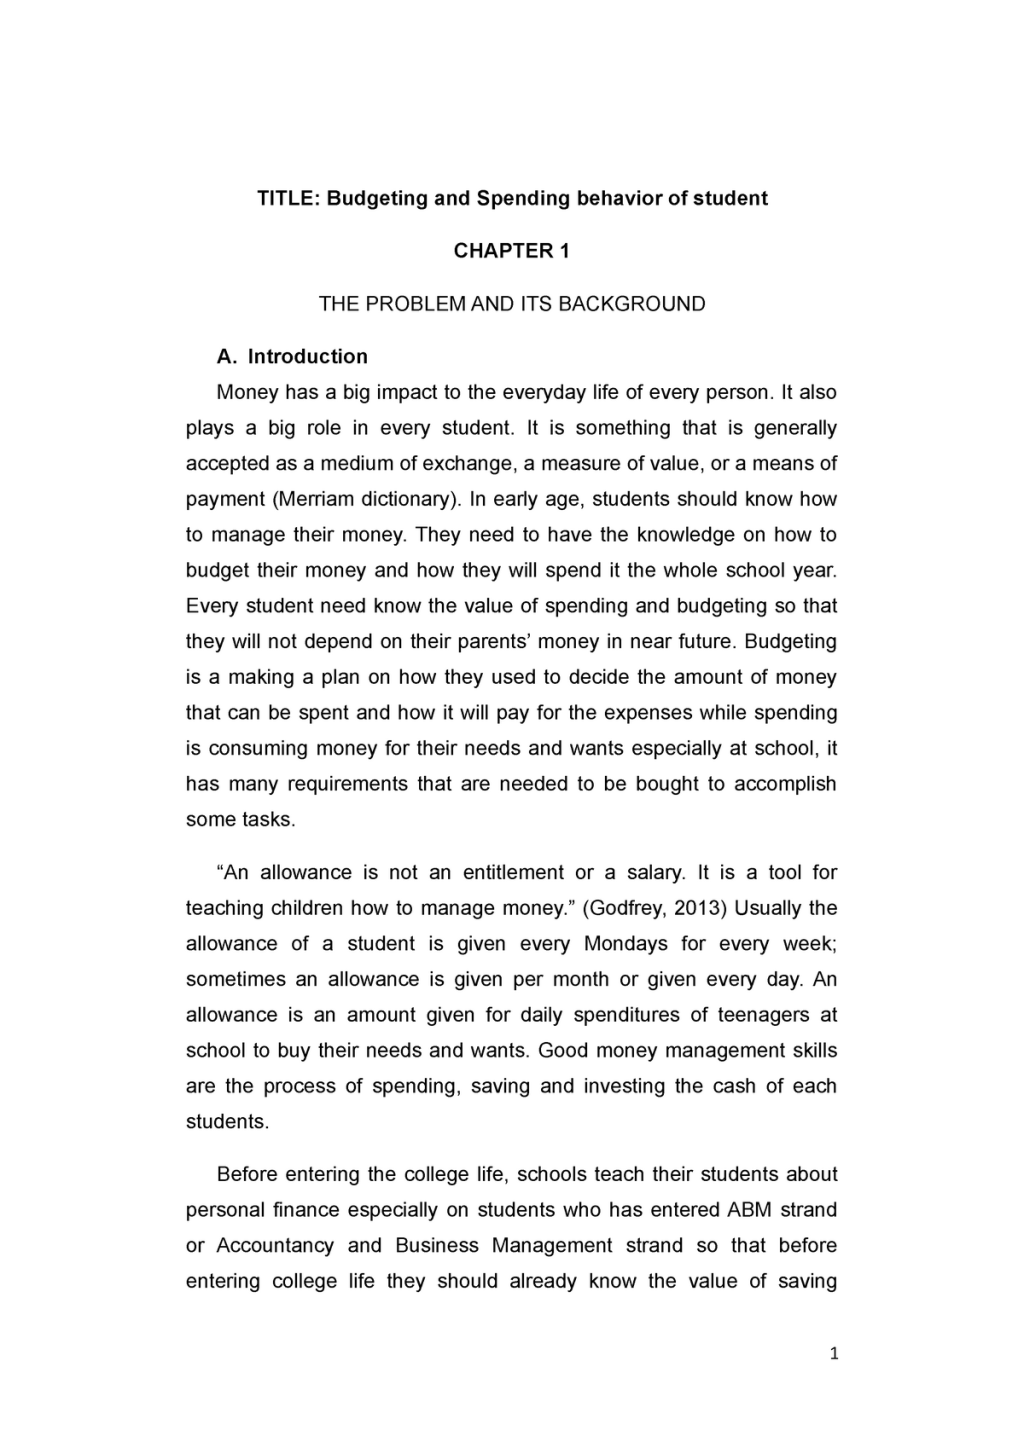 Picture of: Research Chapter – (Final Budgeting) – TITLE: Budgeting and